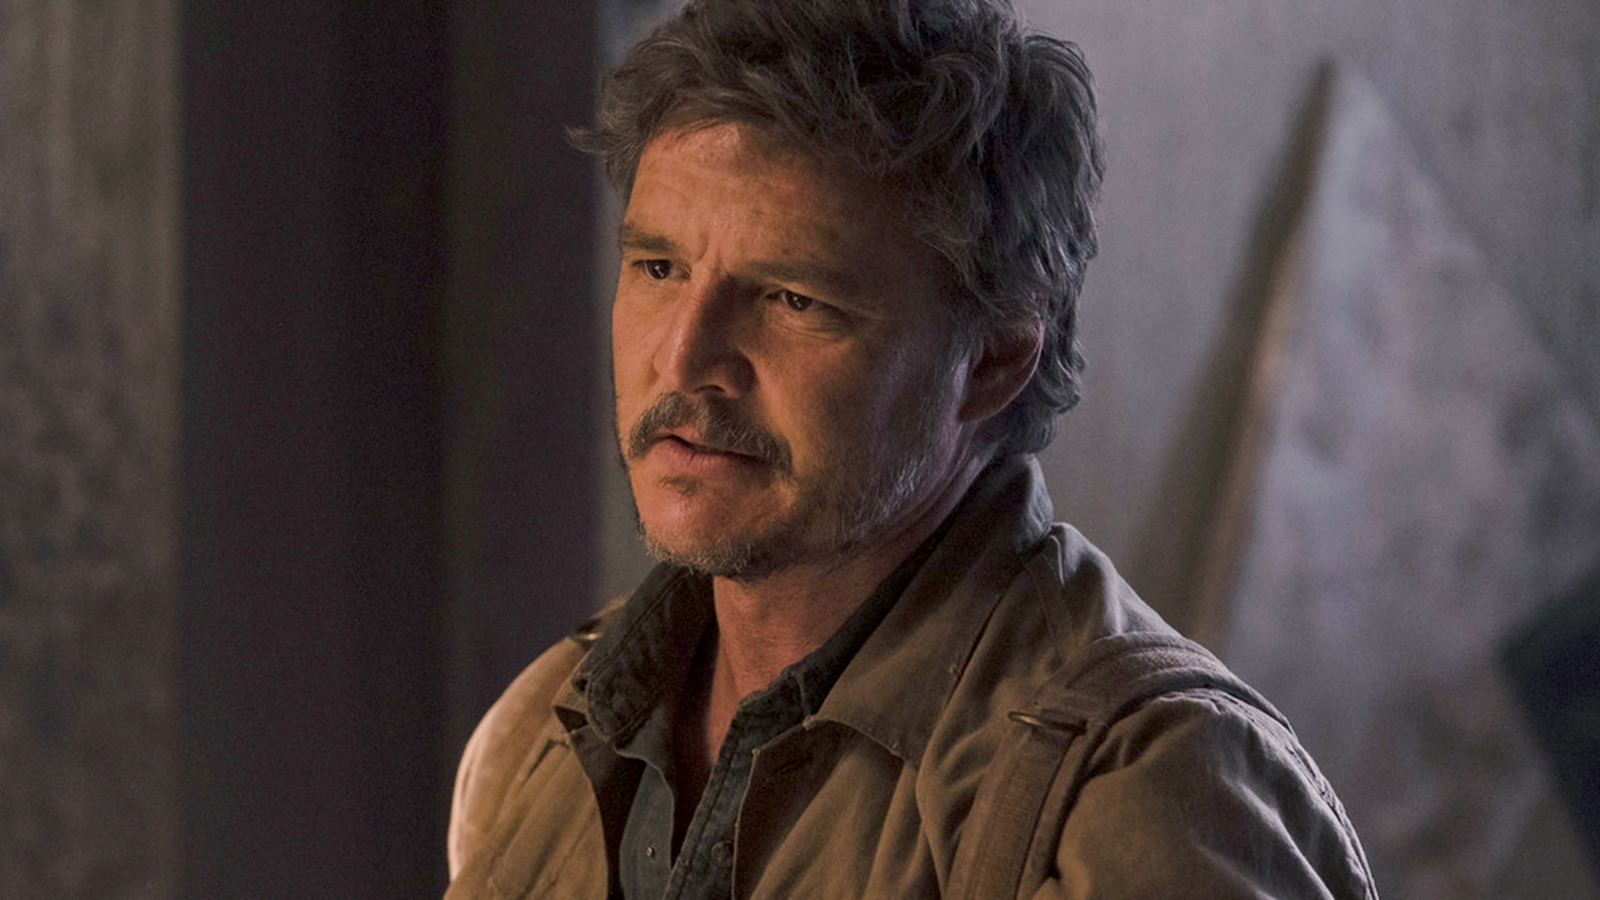 You can now play The Last of Us using the face of Pedro Pascal